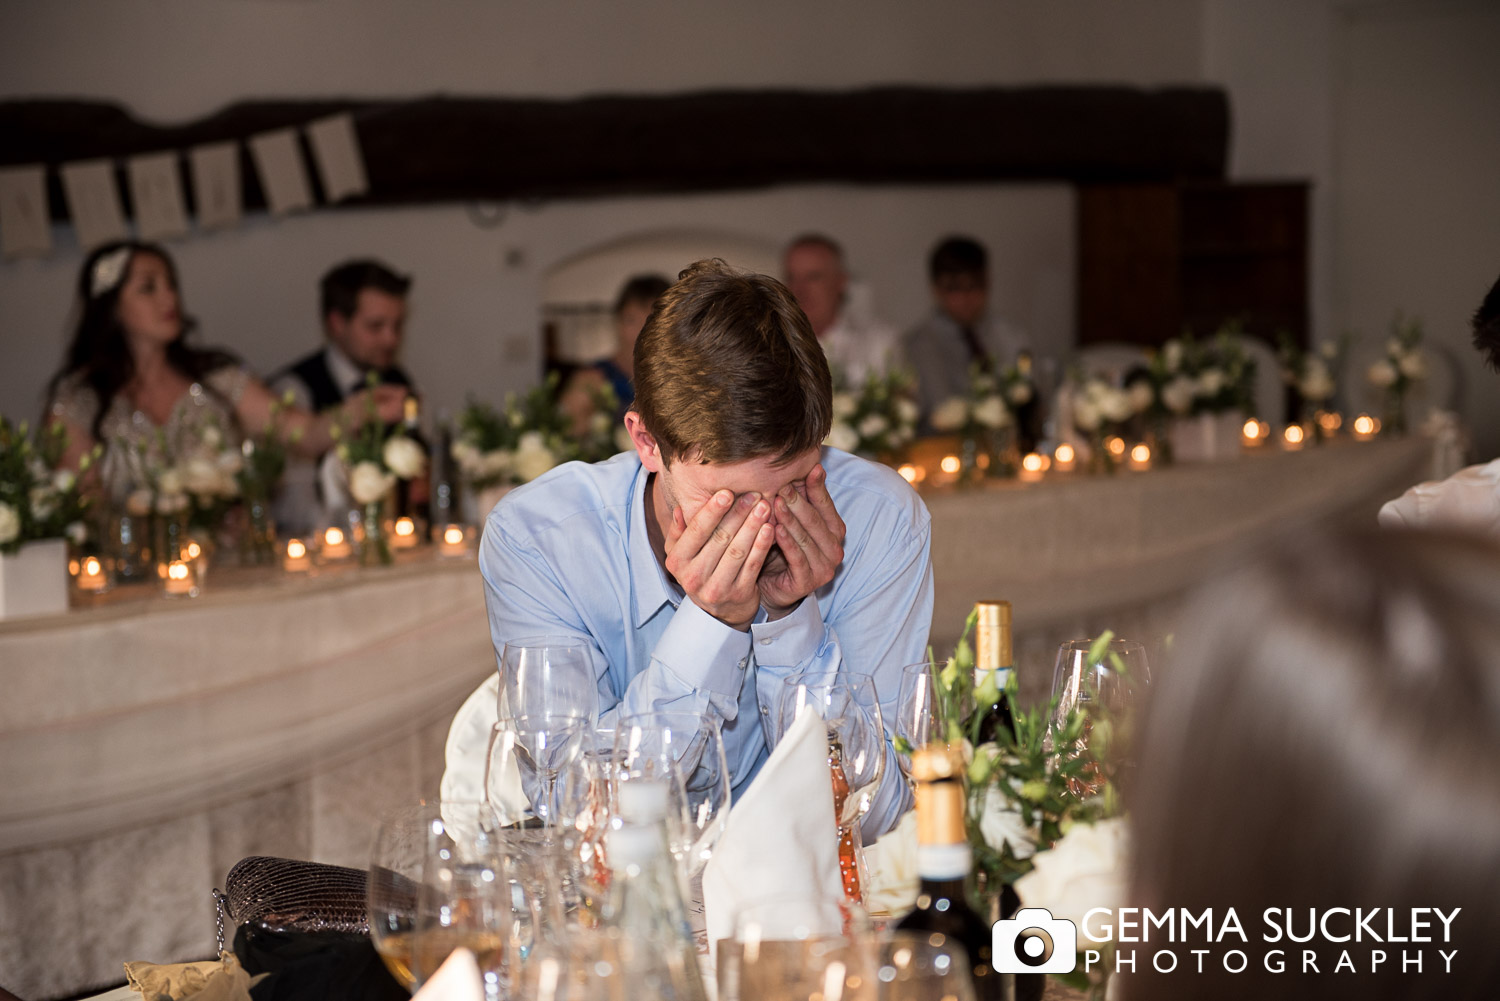 Wedding guest covering his face laughing during wedding sppeches